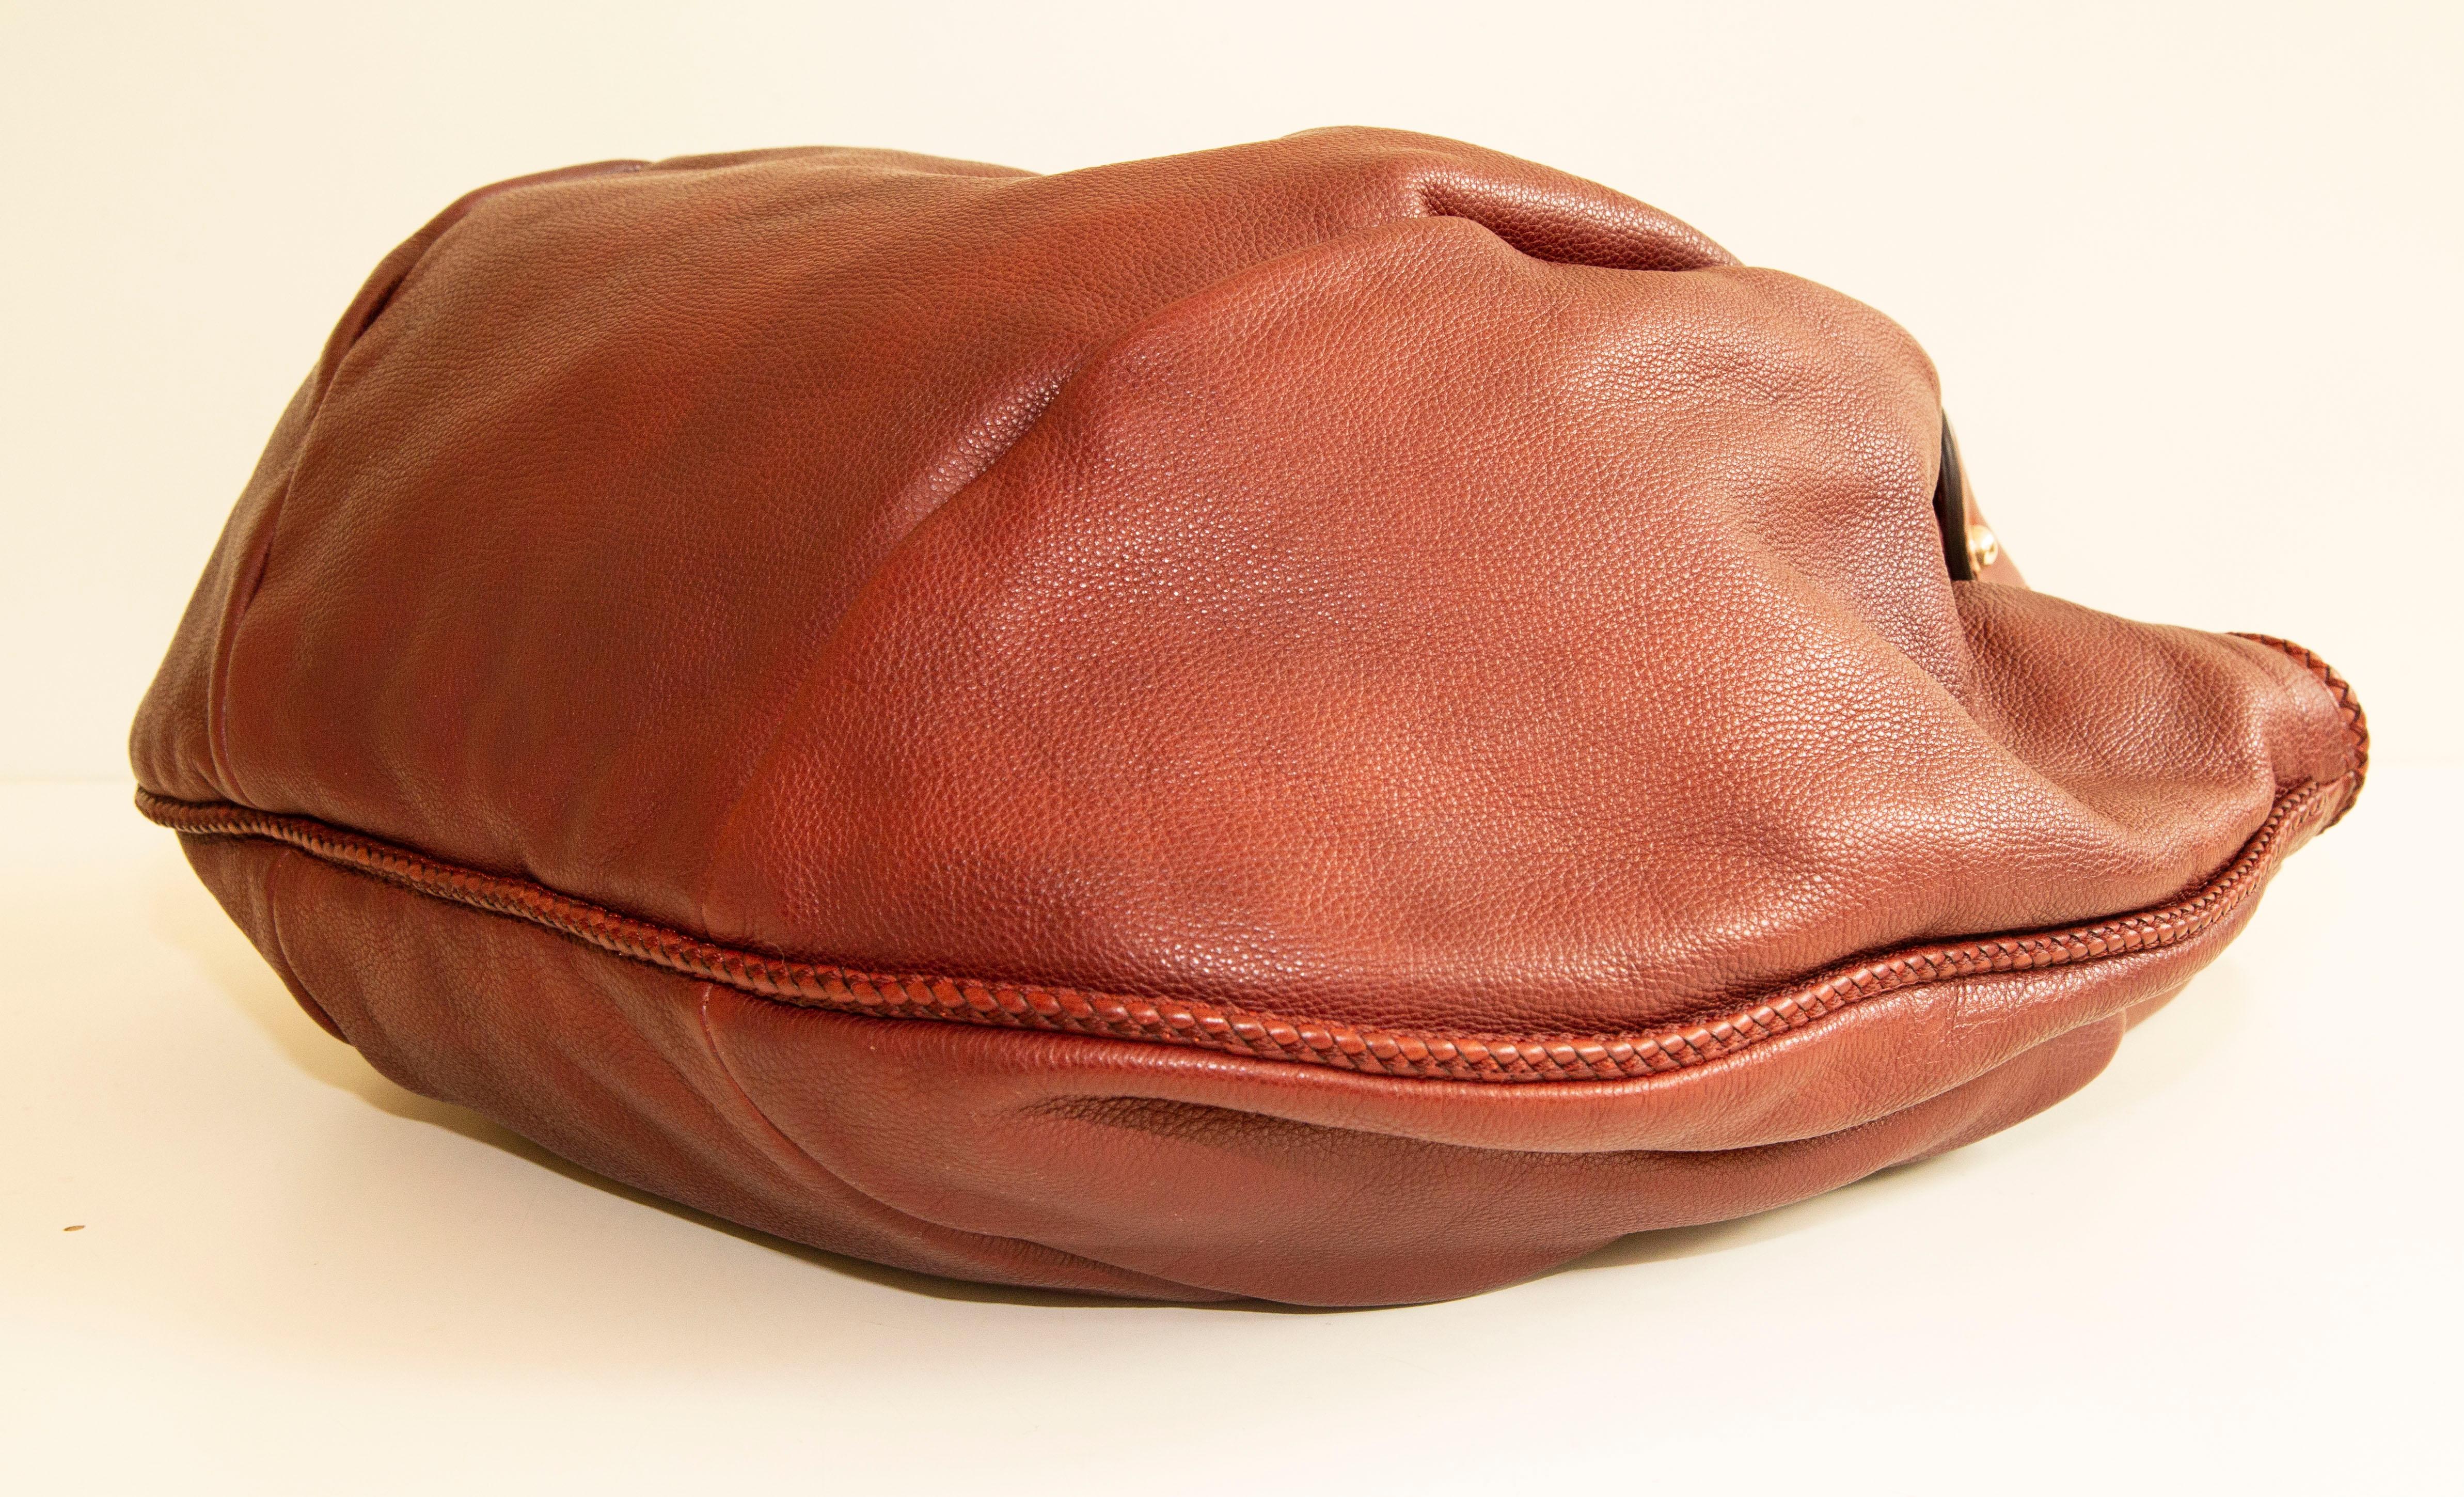 Women's or Men's Gucci Marrakech Hobo Shoulder Bag in Earth Red Leather For Sale